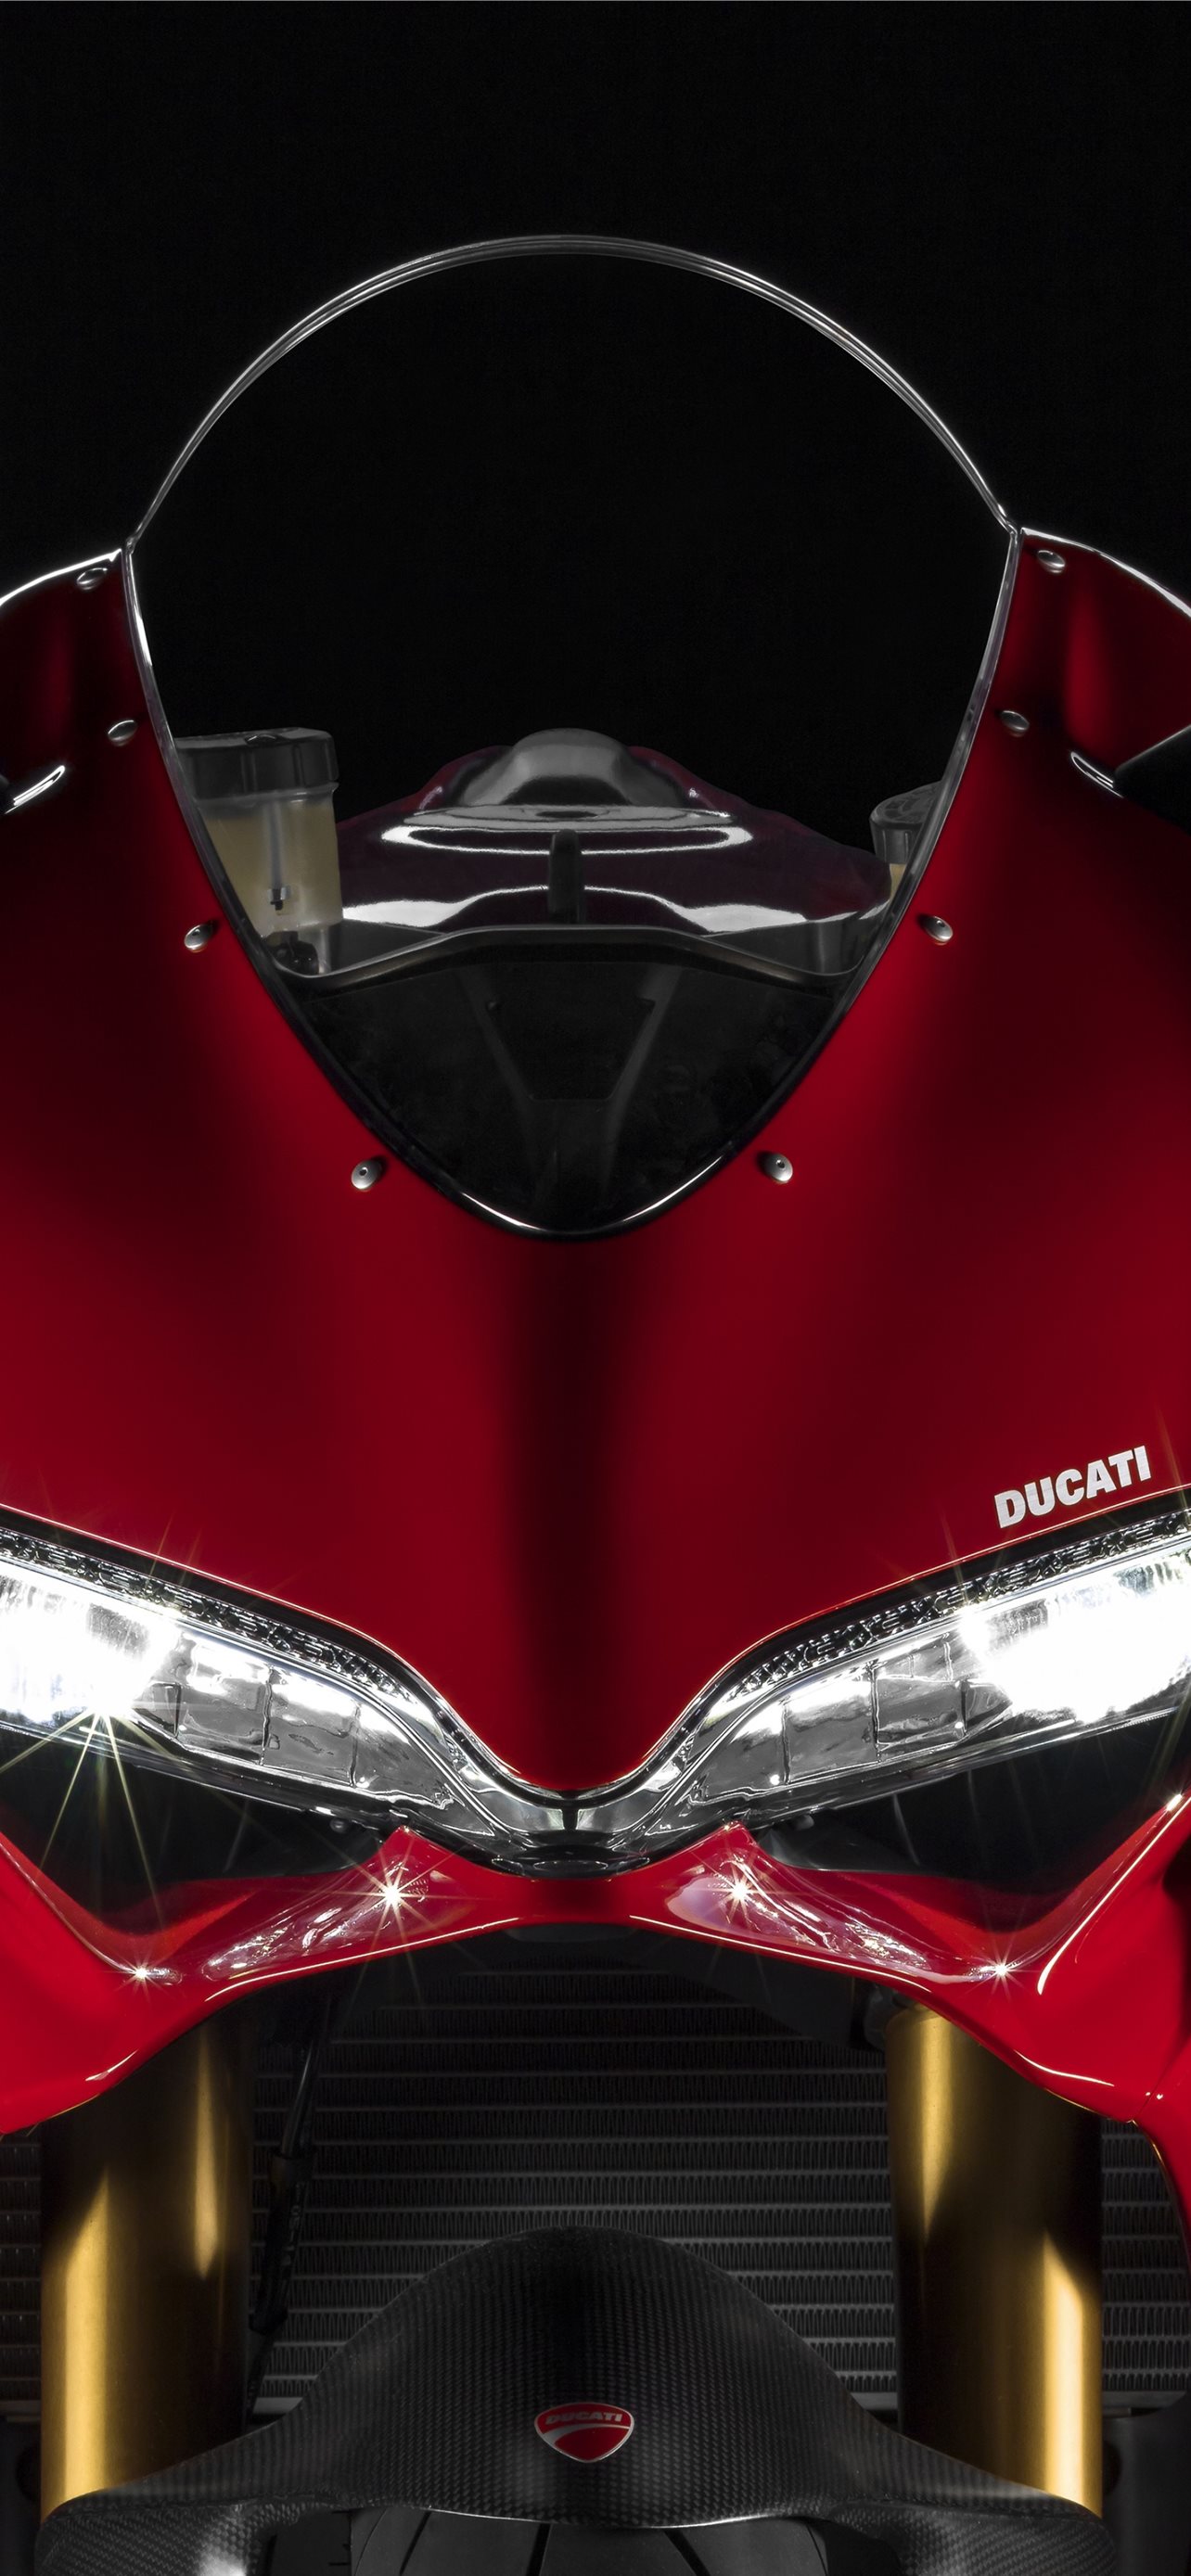 1080x1920  1080x1920 bikes ducati hd for Iphone 6 7 8 wallpaper   Coolwallpapersme